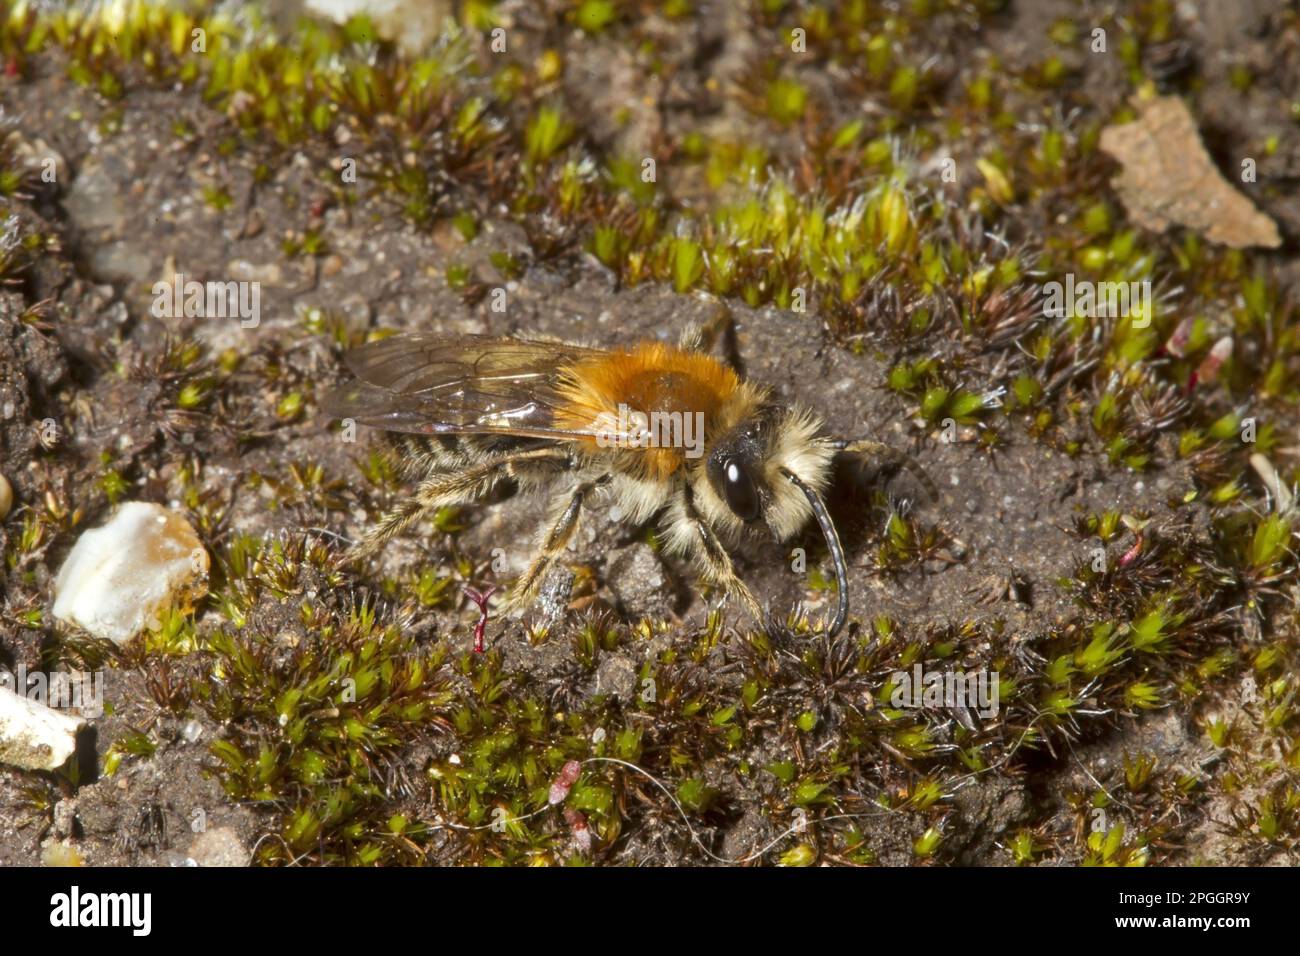 Glossy dusky sand bee, Downy earth bee, Glossy dusky sand bee, Downy earth bee, Sand bee, Sand bees, Earth bee, Earth bees, Other animals, Insects Stock Photo